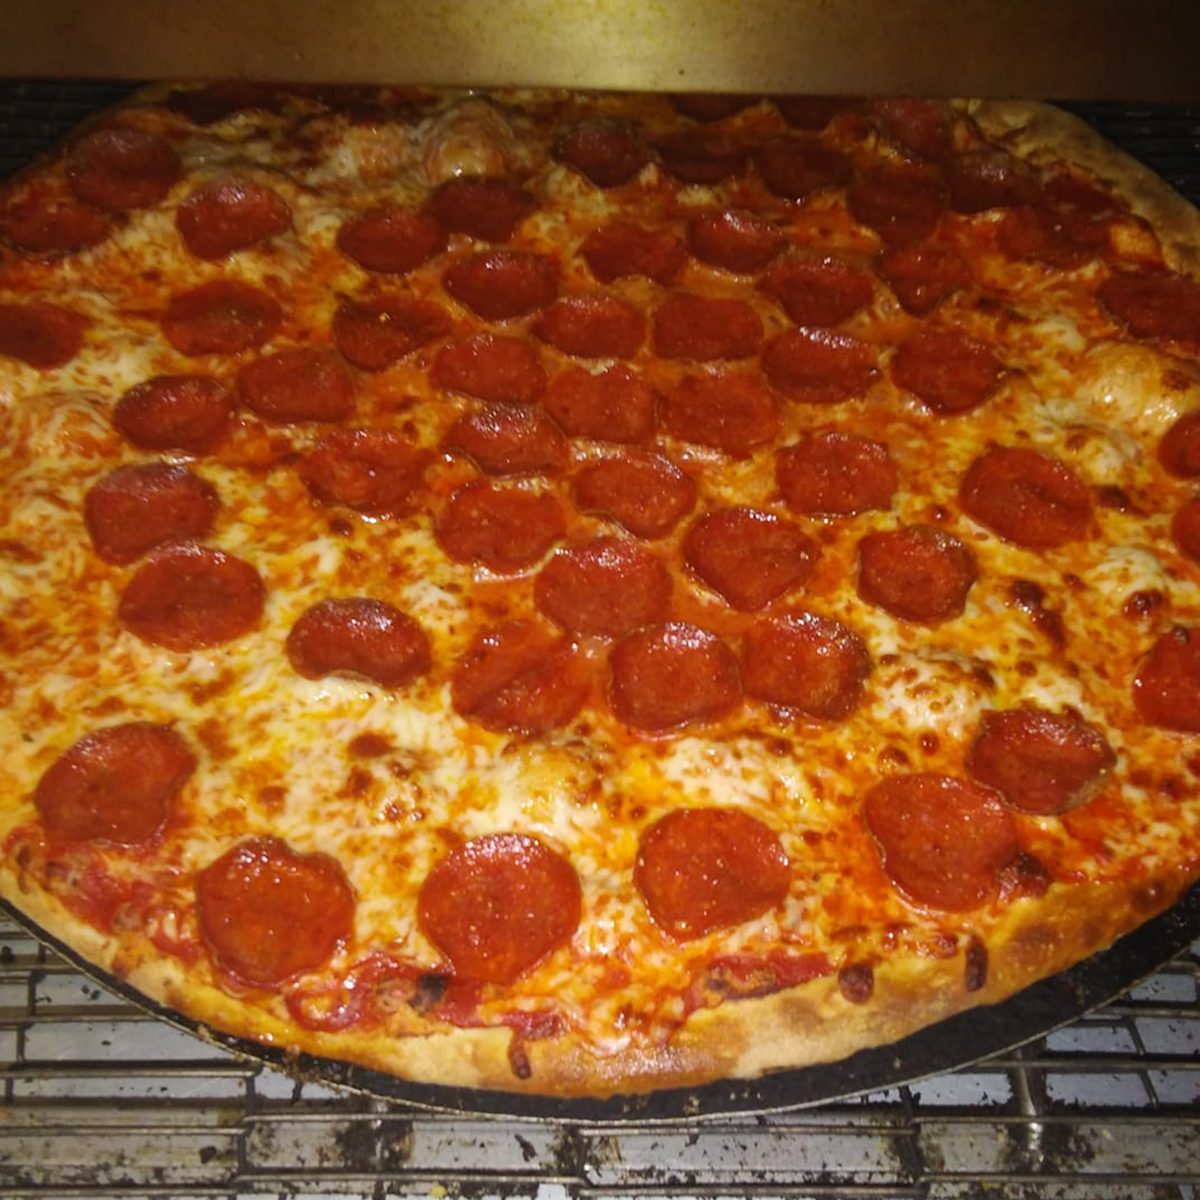 cheese and pepperoni pizza from Giovanni's Pizzeria